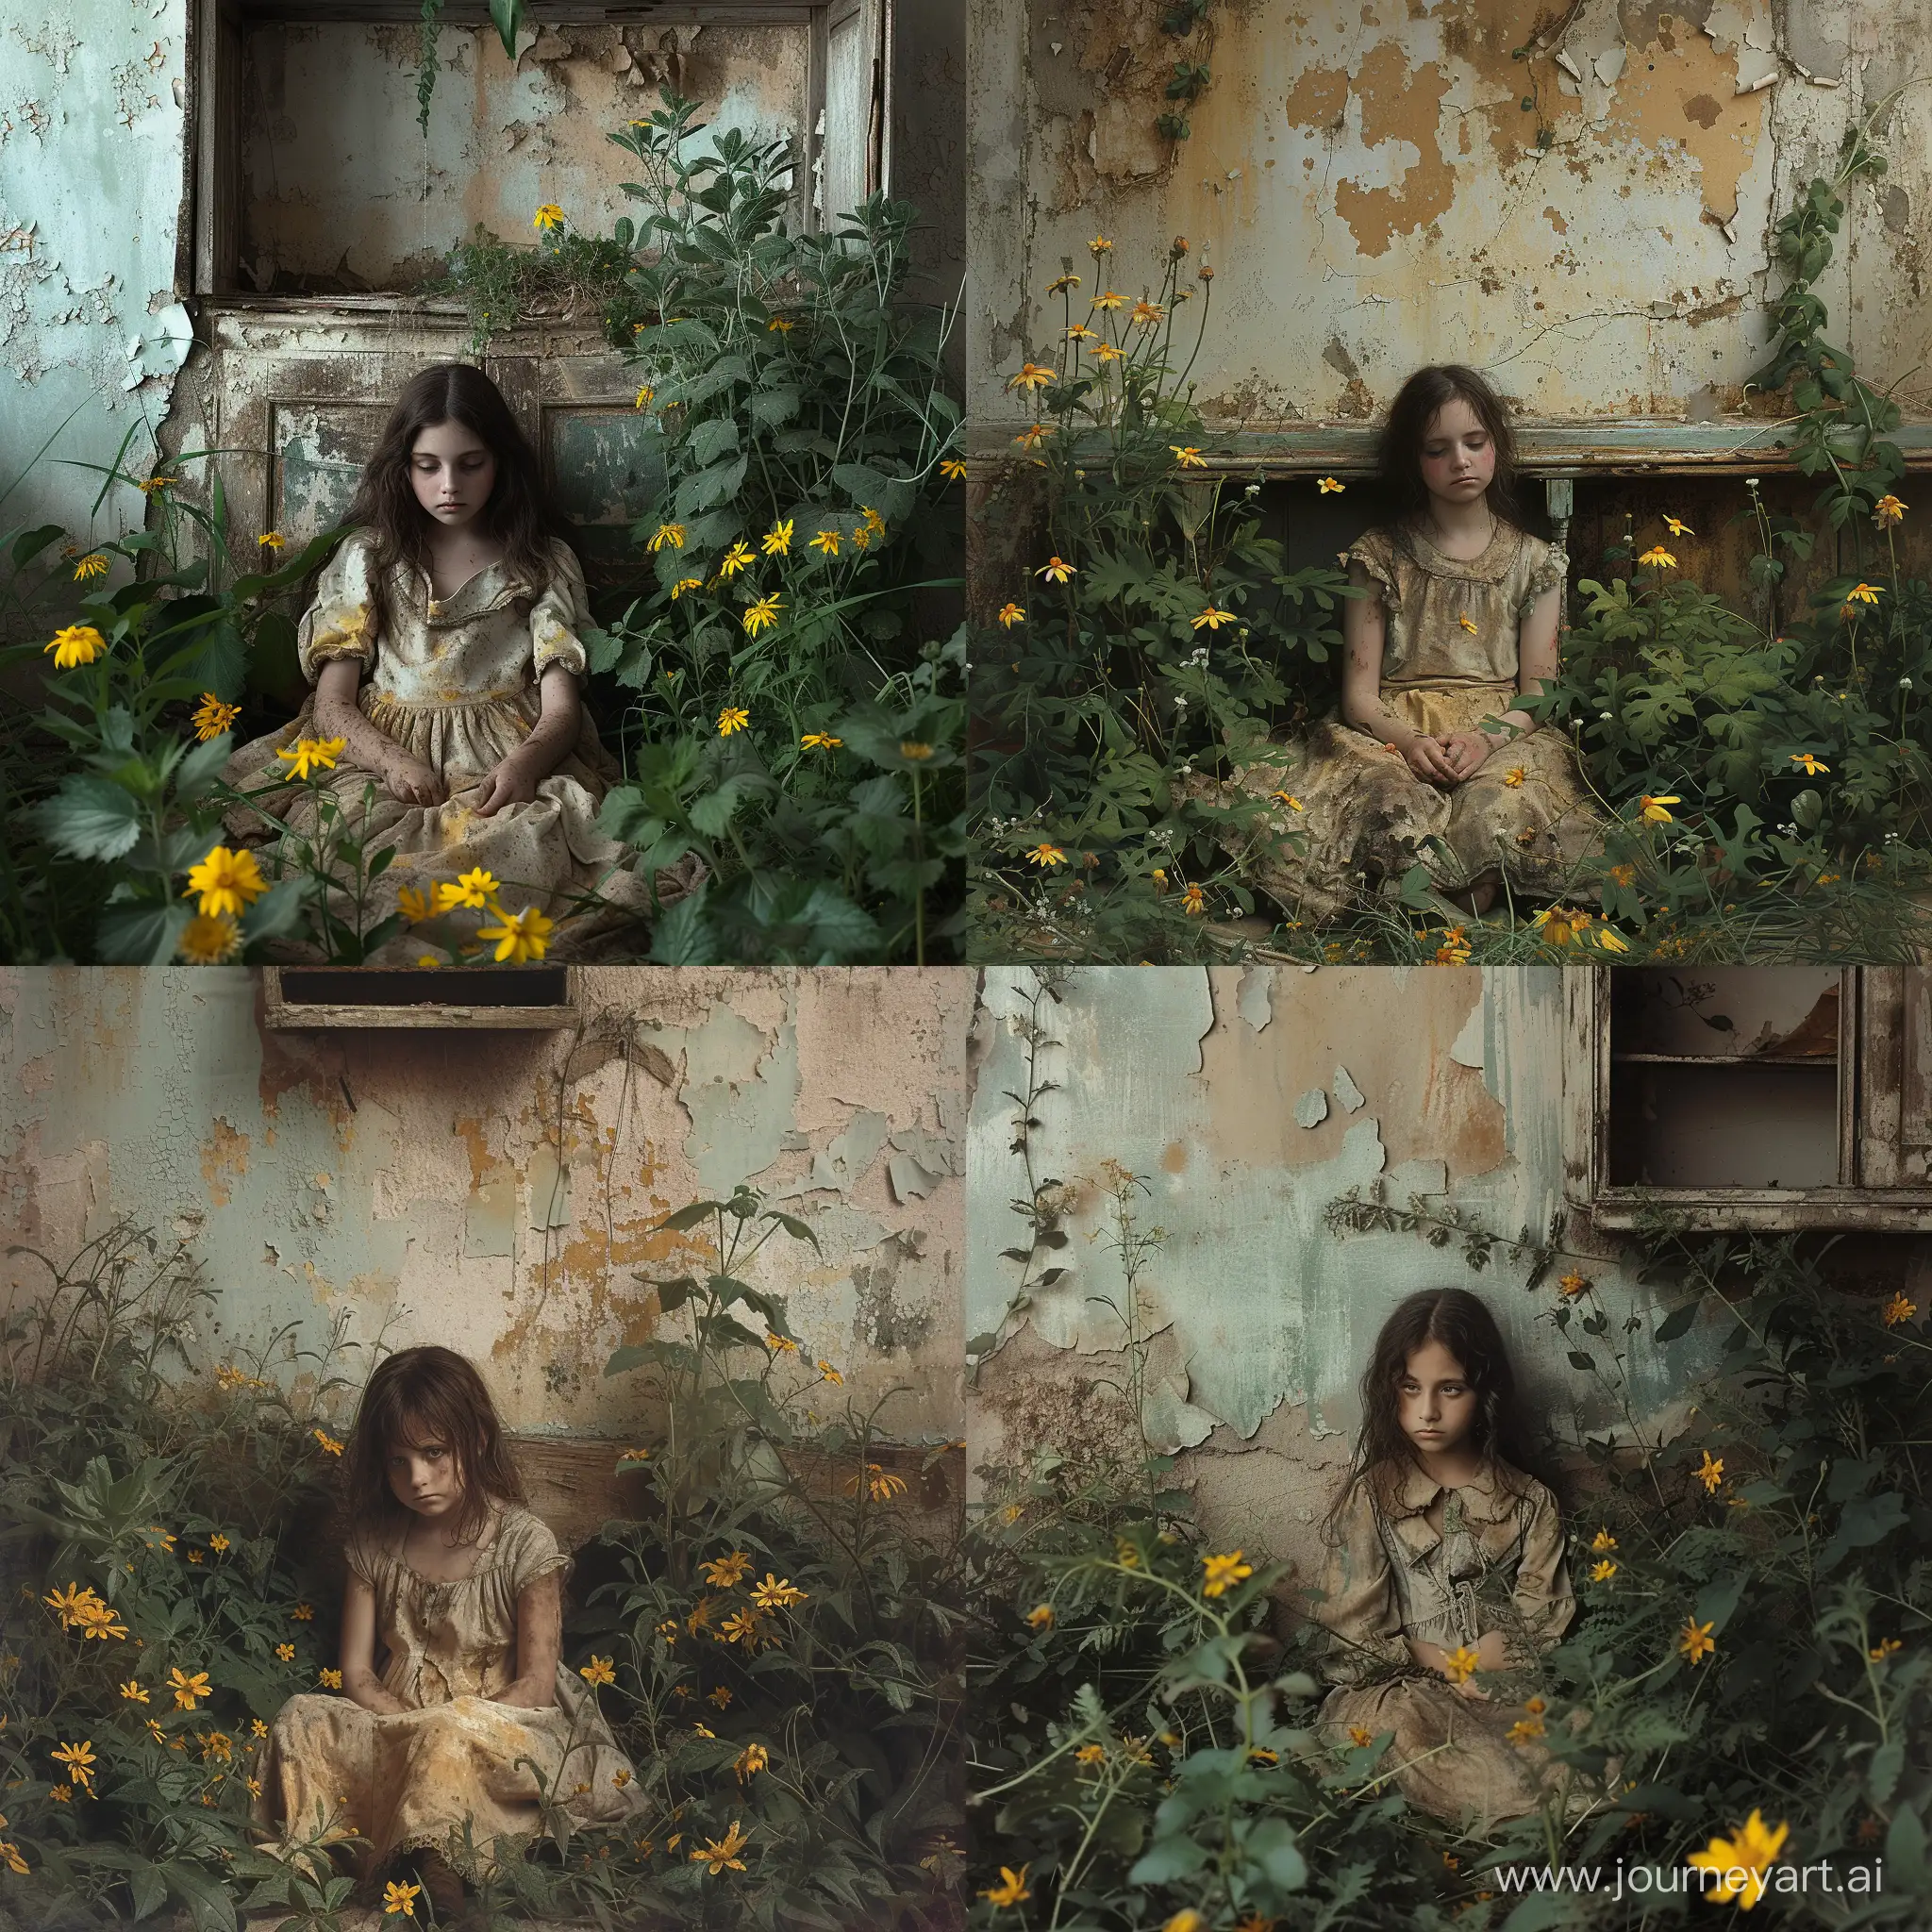 A sad girl, sitting amidst overgrown plants and flowers, wearing a dirty, aged, and worn-out dress that appears to be from an older era, seated in front of an old, dilapidated wall with peeling paint and a broken shelf or cabinet, with yellow flowers growing around the person, indicating an abandoned or neglected setting